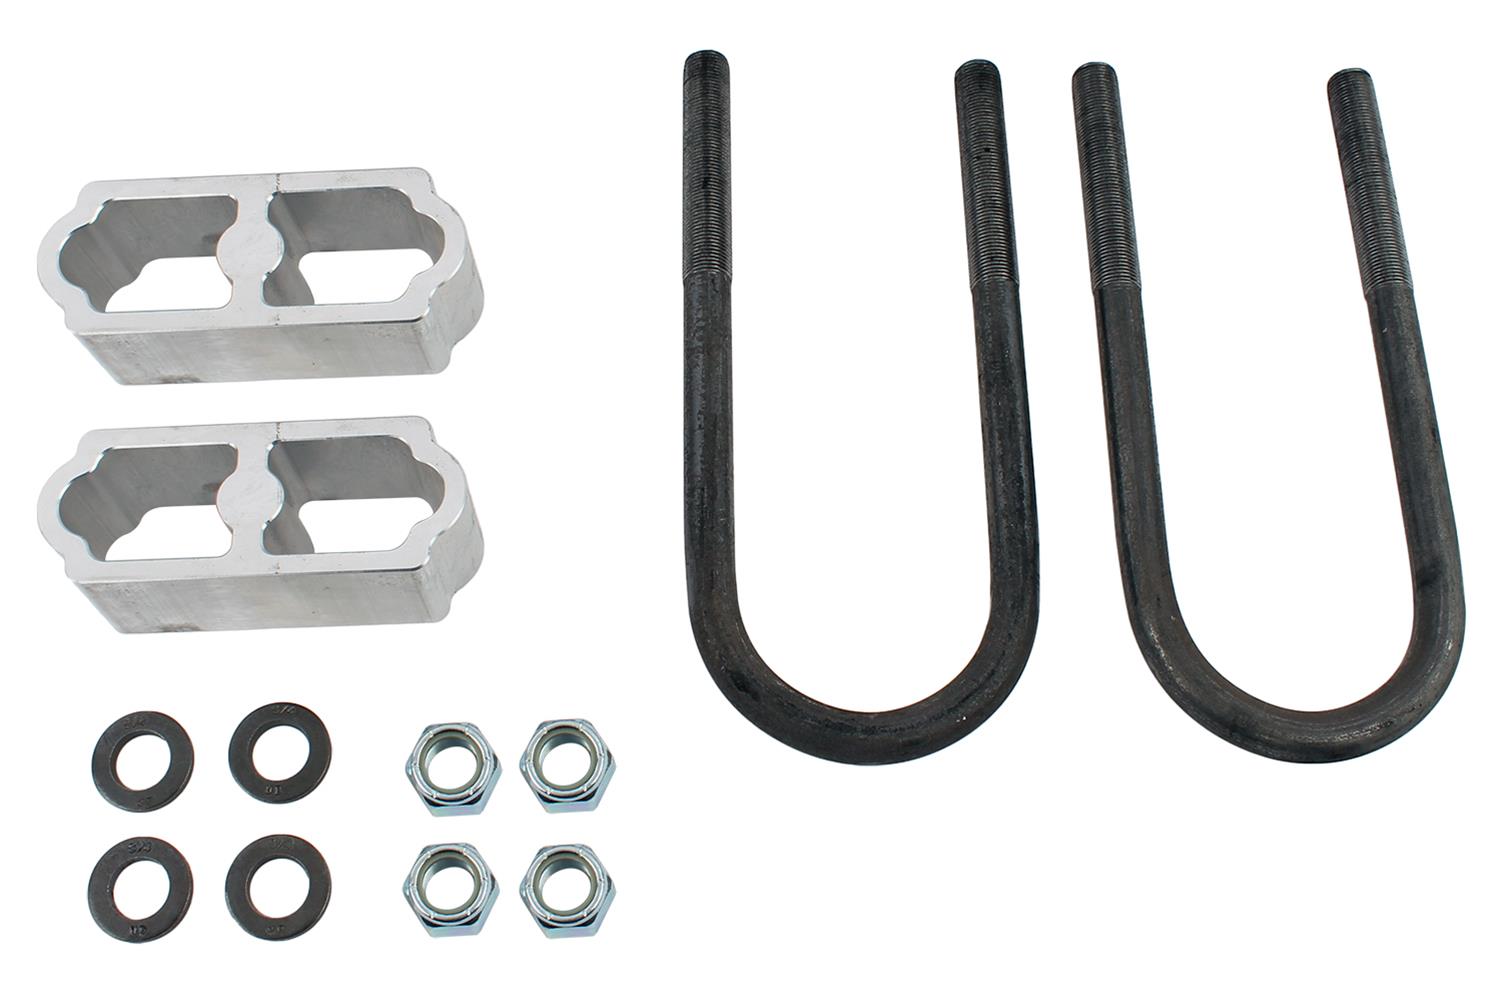 100mm LOWERING BLOCKS WITH U BOLTS FOR NISSAN URVAN 4 INCH